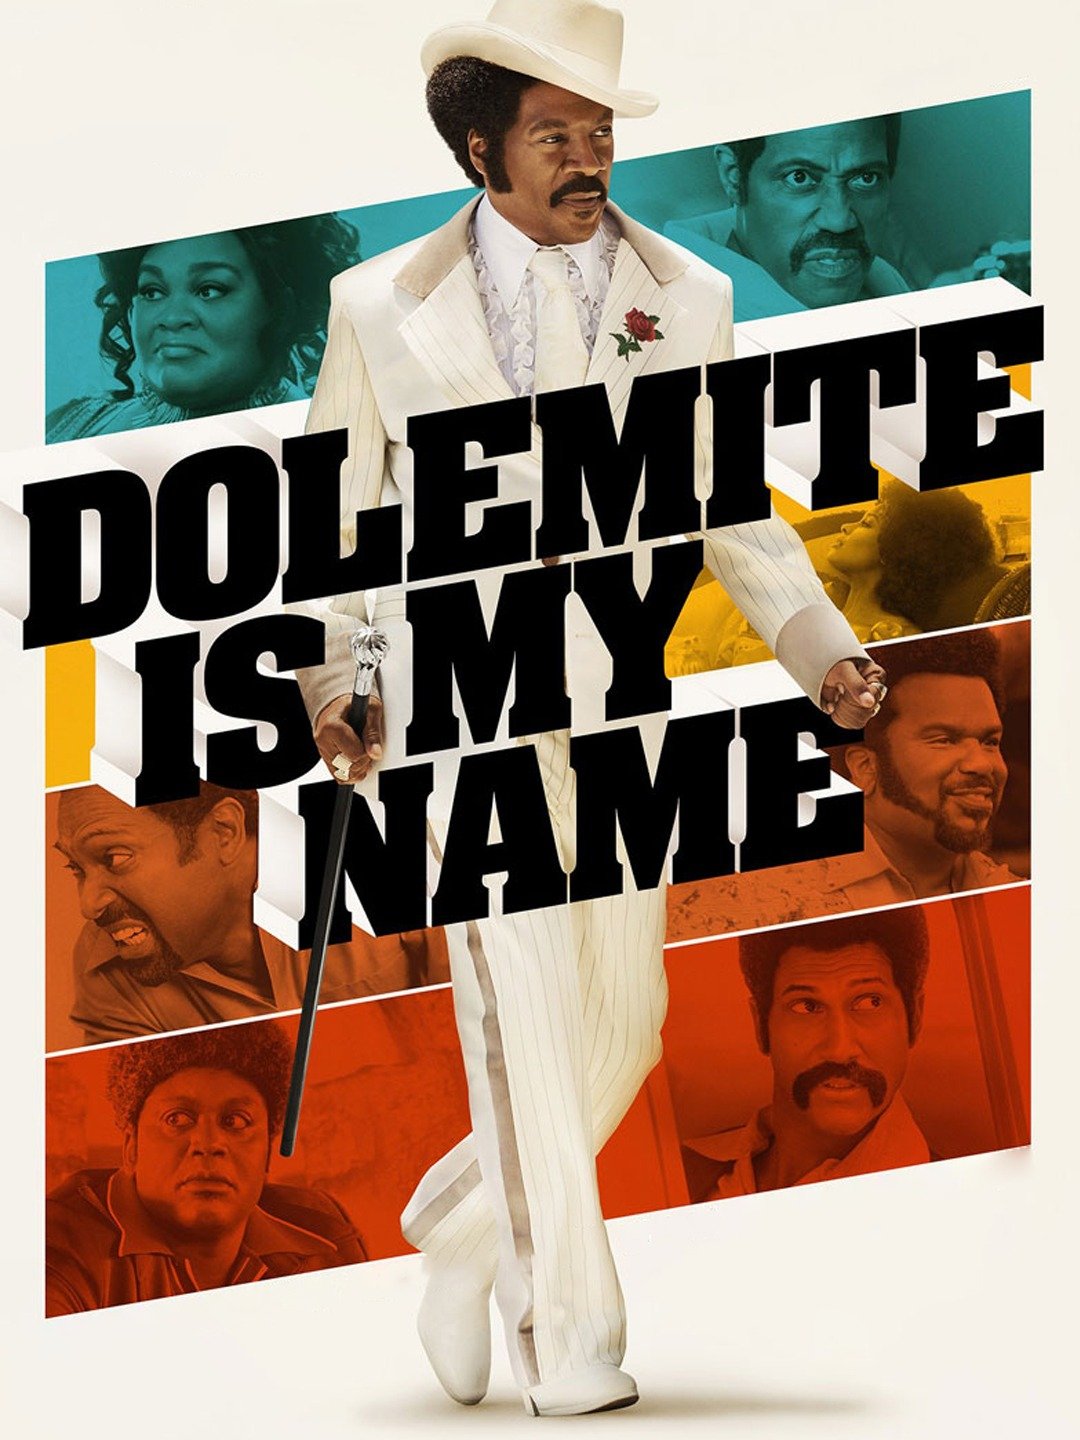 Dolemite Is My Name: Trailer 1 - Trailers & Videos - Rotten Tomatoes